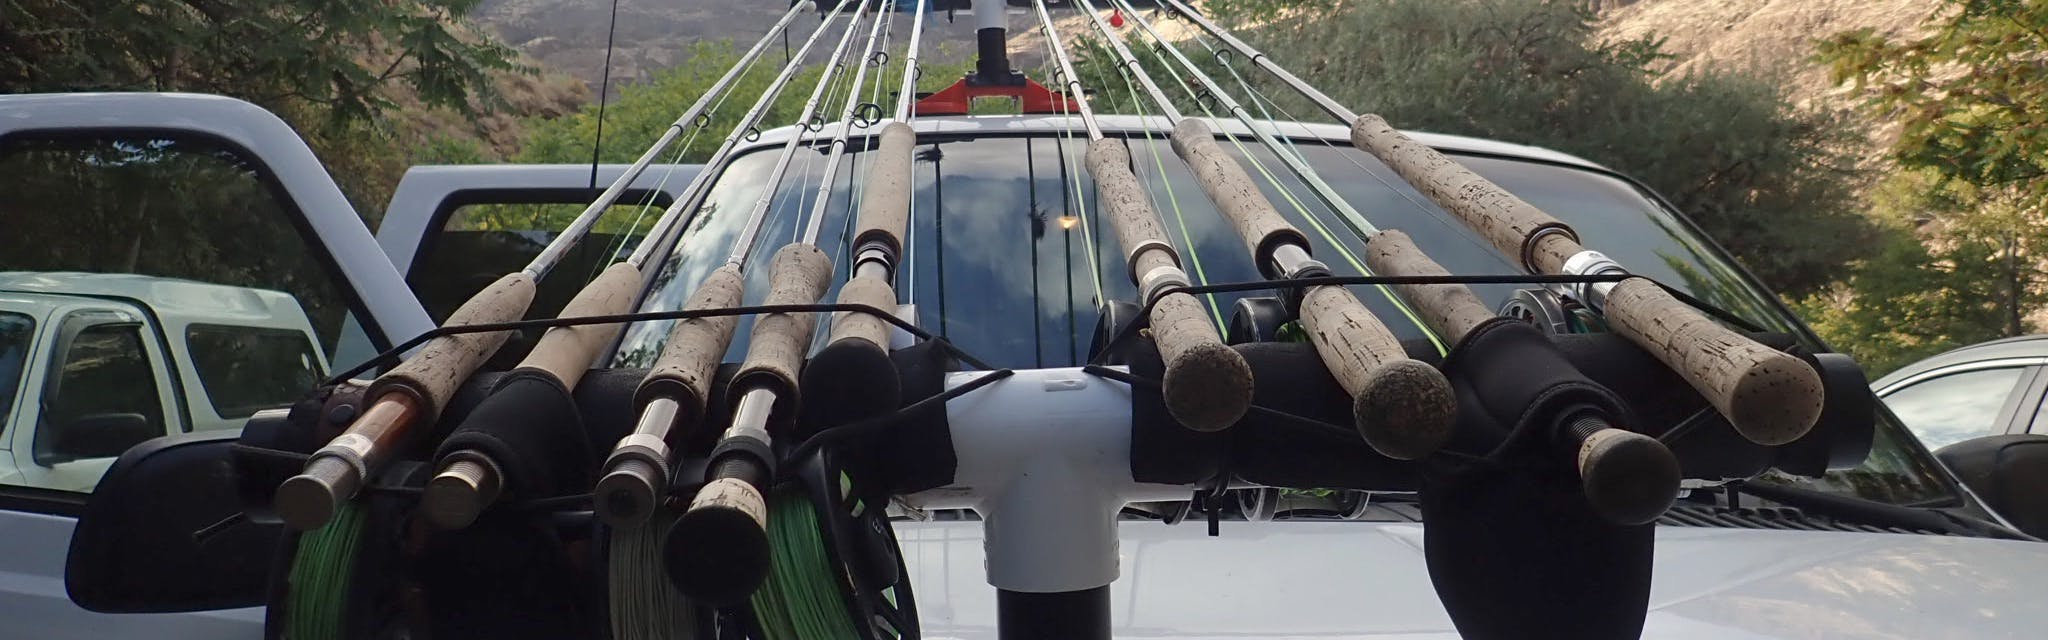 Nine fly fishing rods on a rack on the hood of a truck